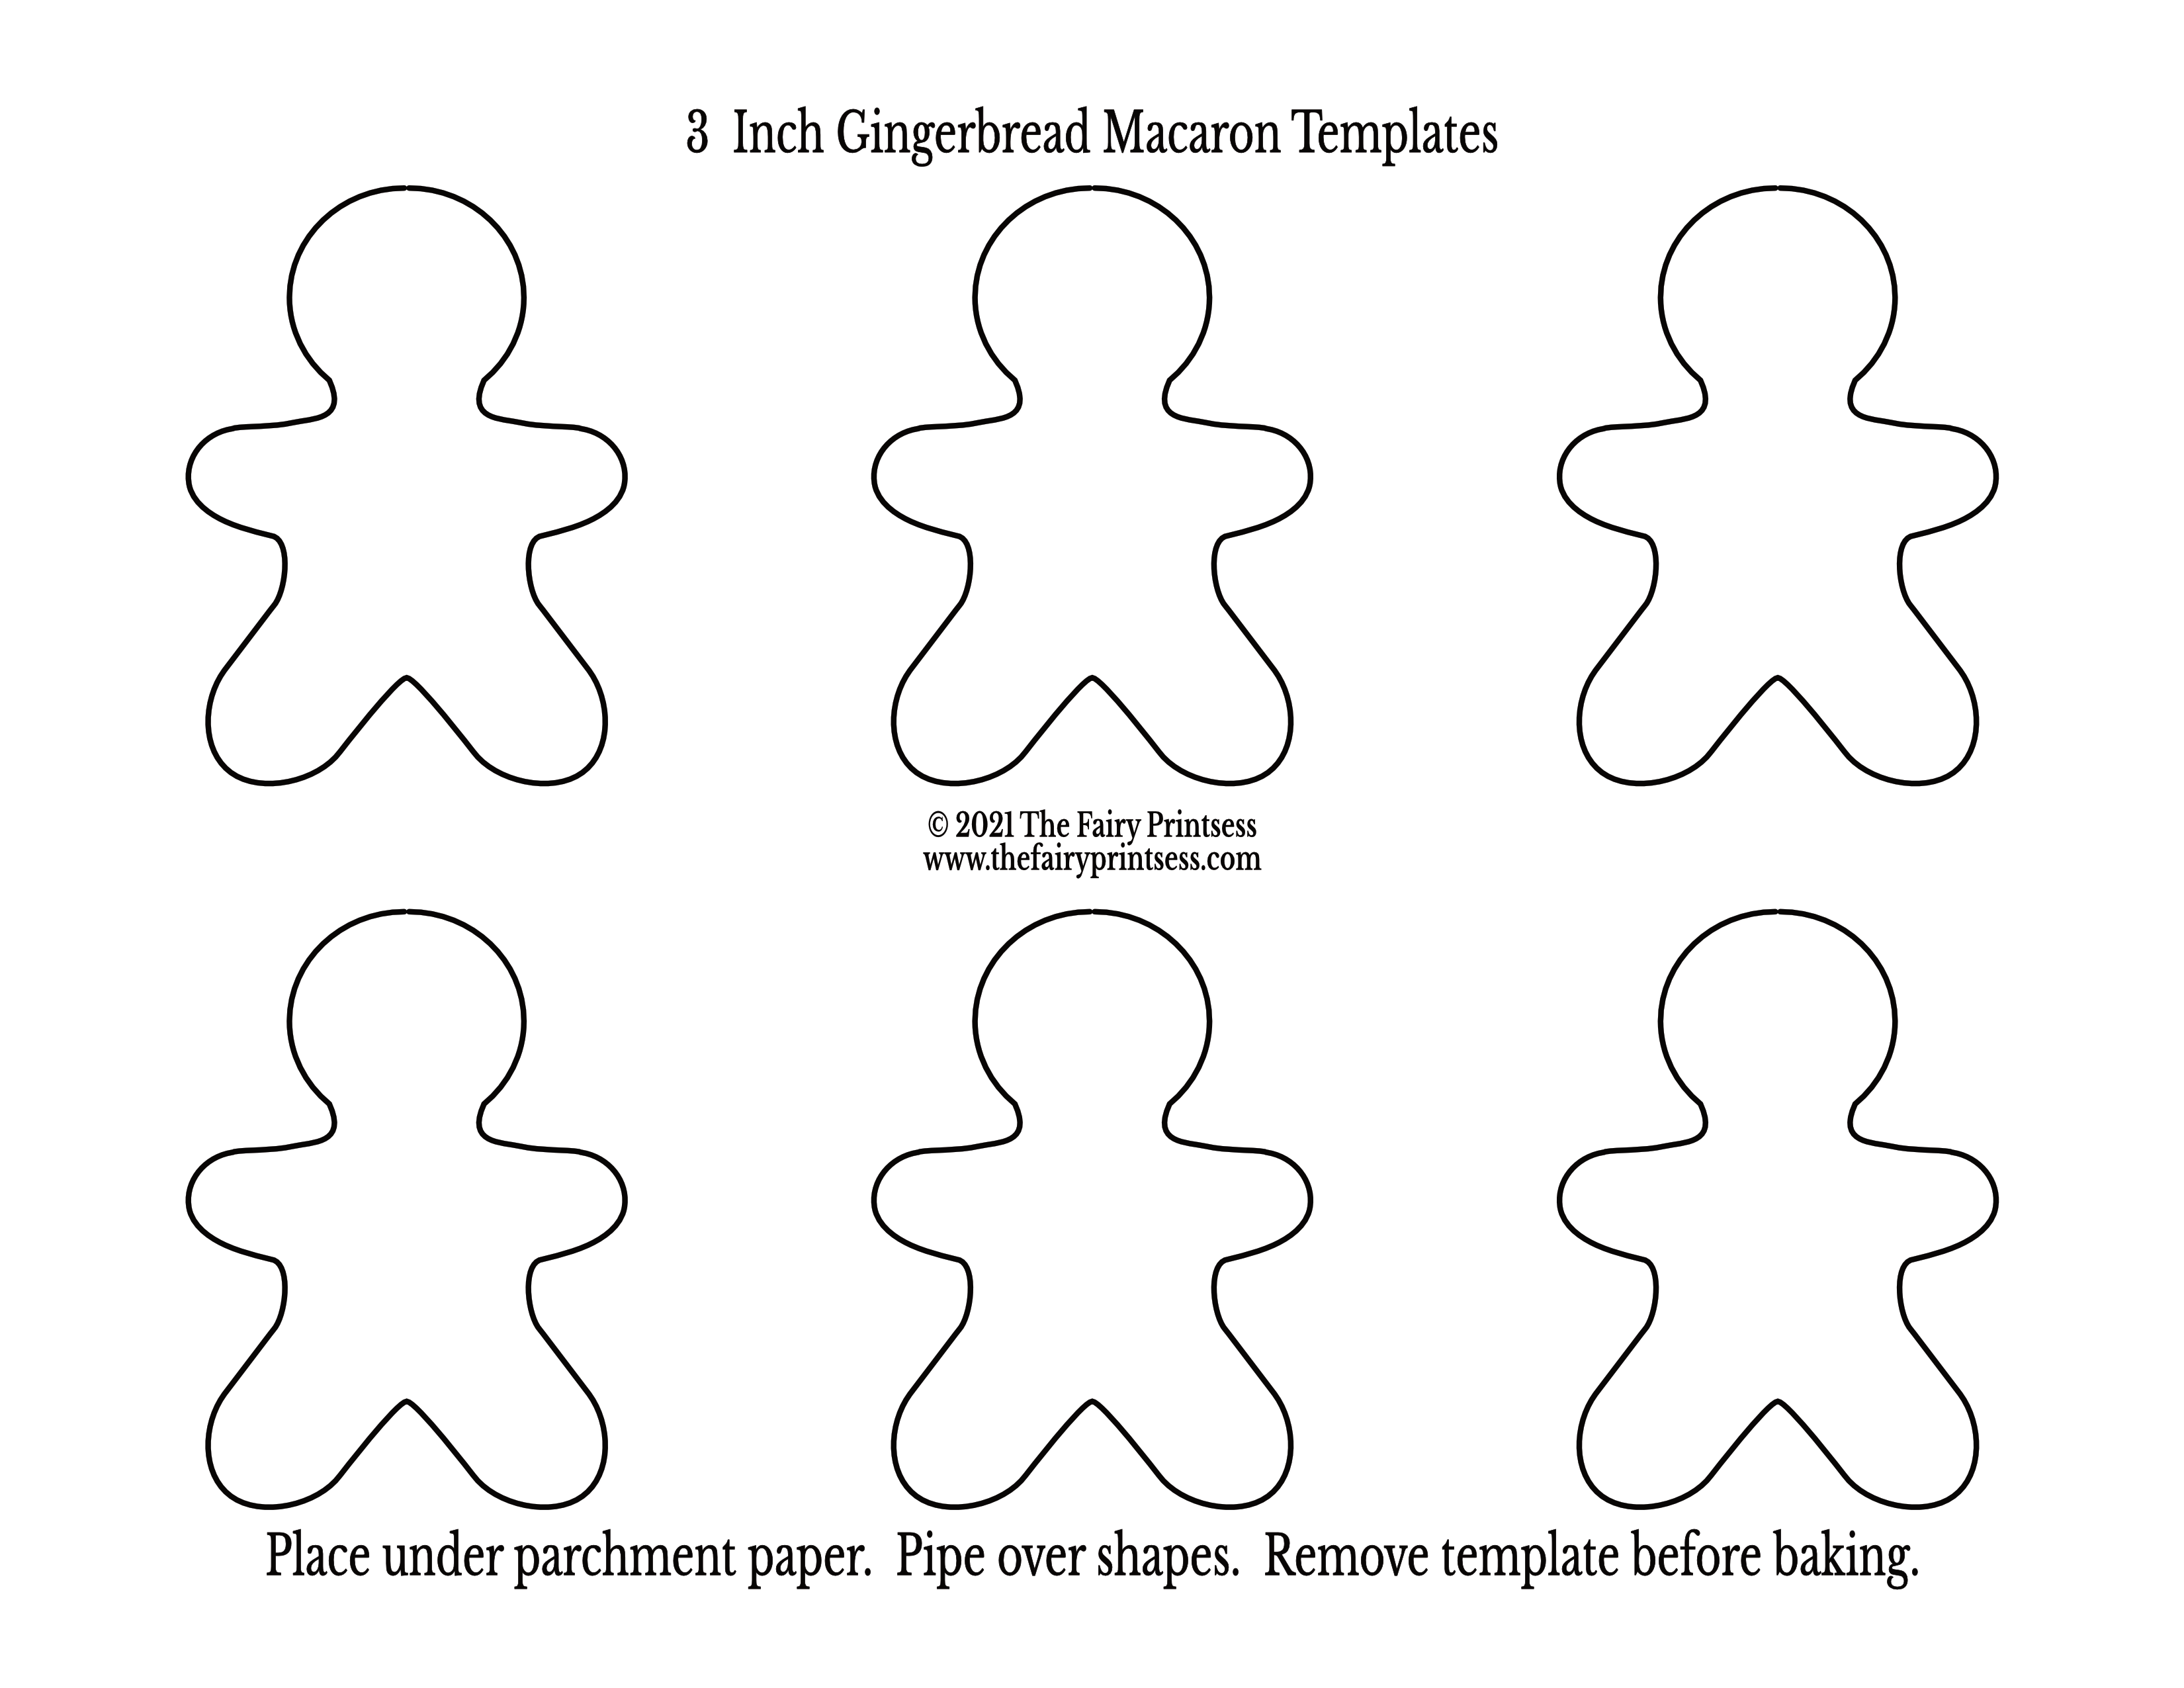 3 inch gingerbread man person macaron template free printable